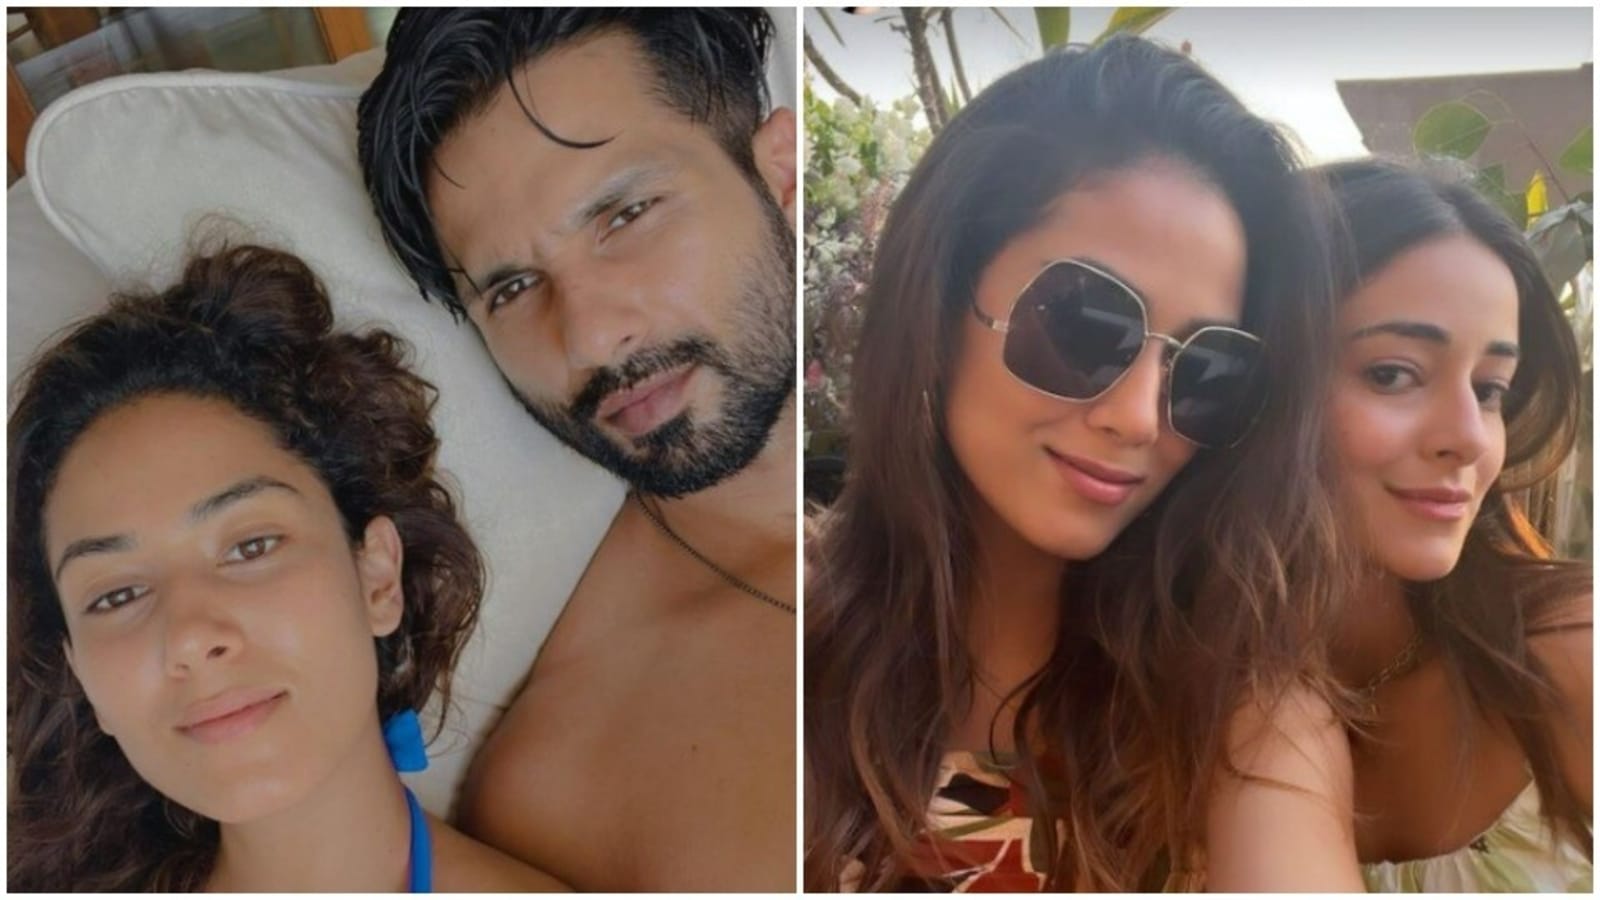 Shahid Kapoor’s birthday: Mira Rajput posts loved-up pic with ‘best husband’, chills with Ananya Panday, Ishaan Khatter